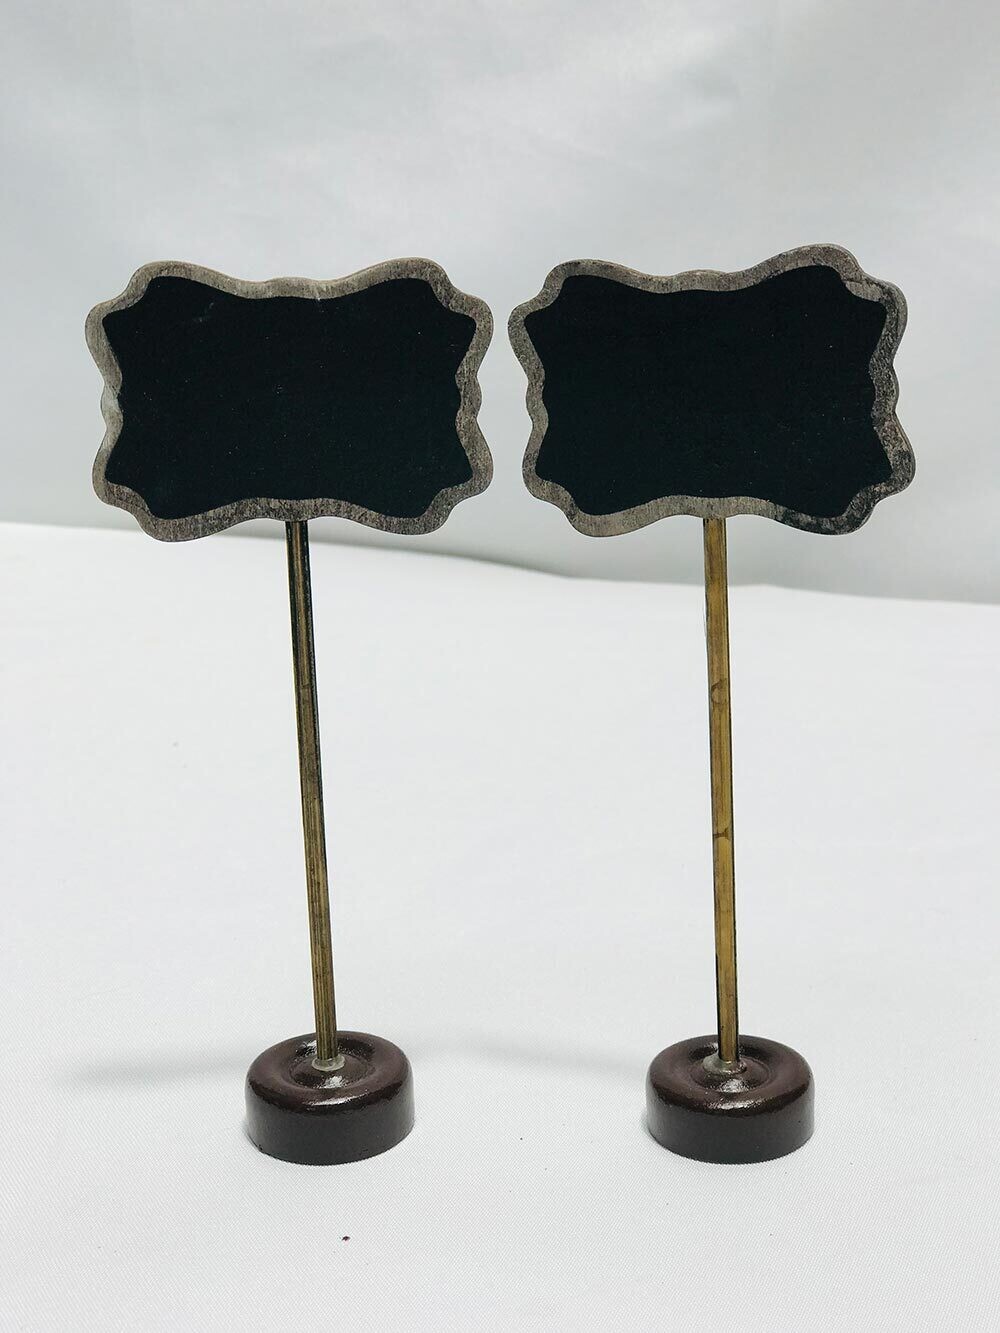 Mini Easel Chalkboard Sign on Stand